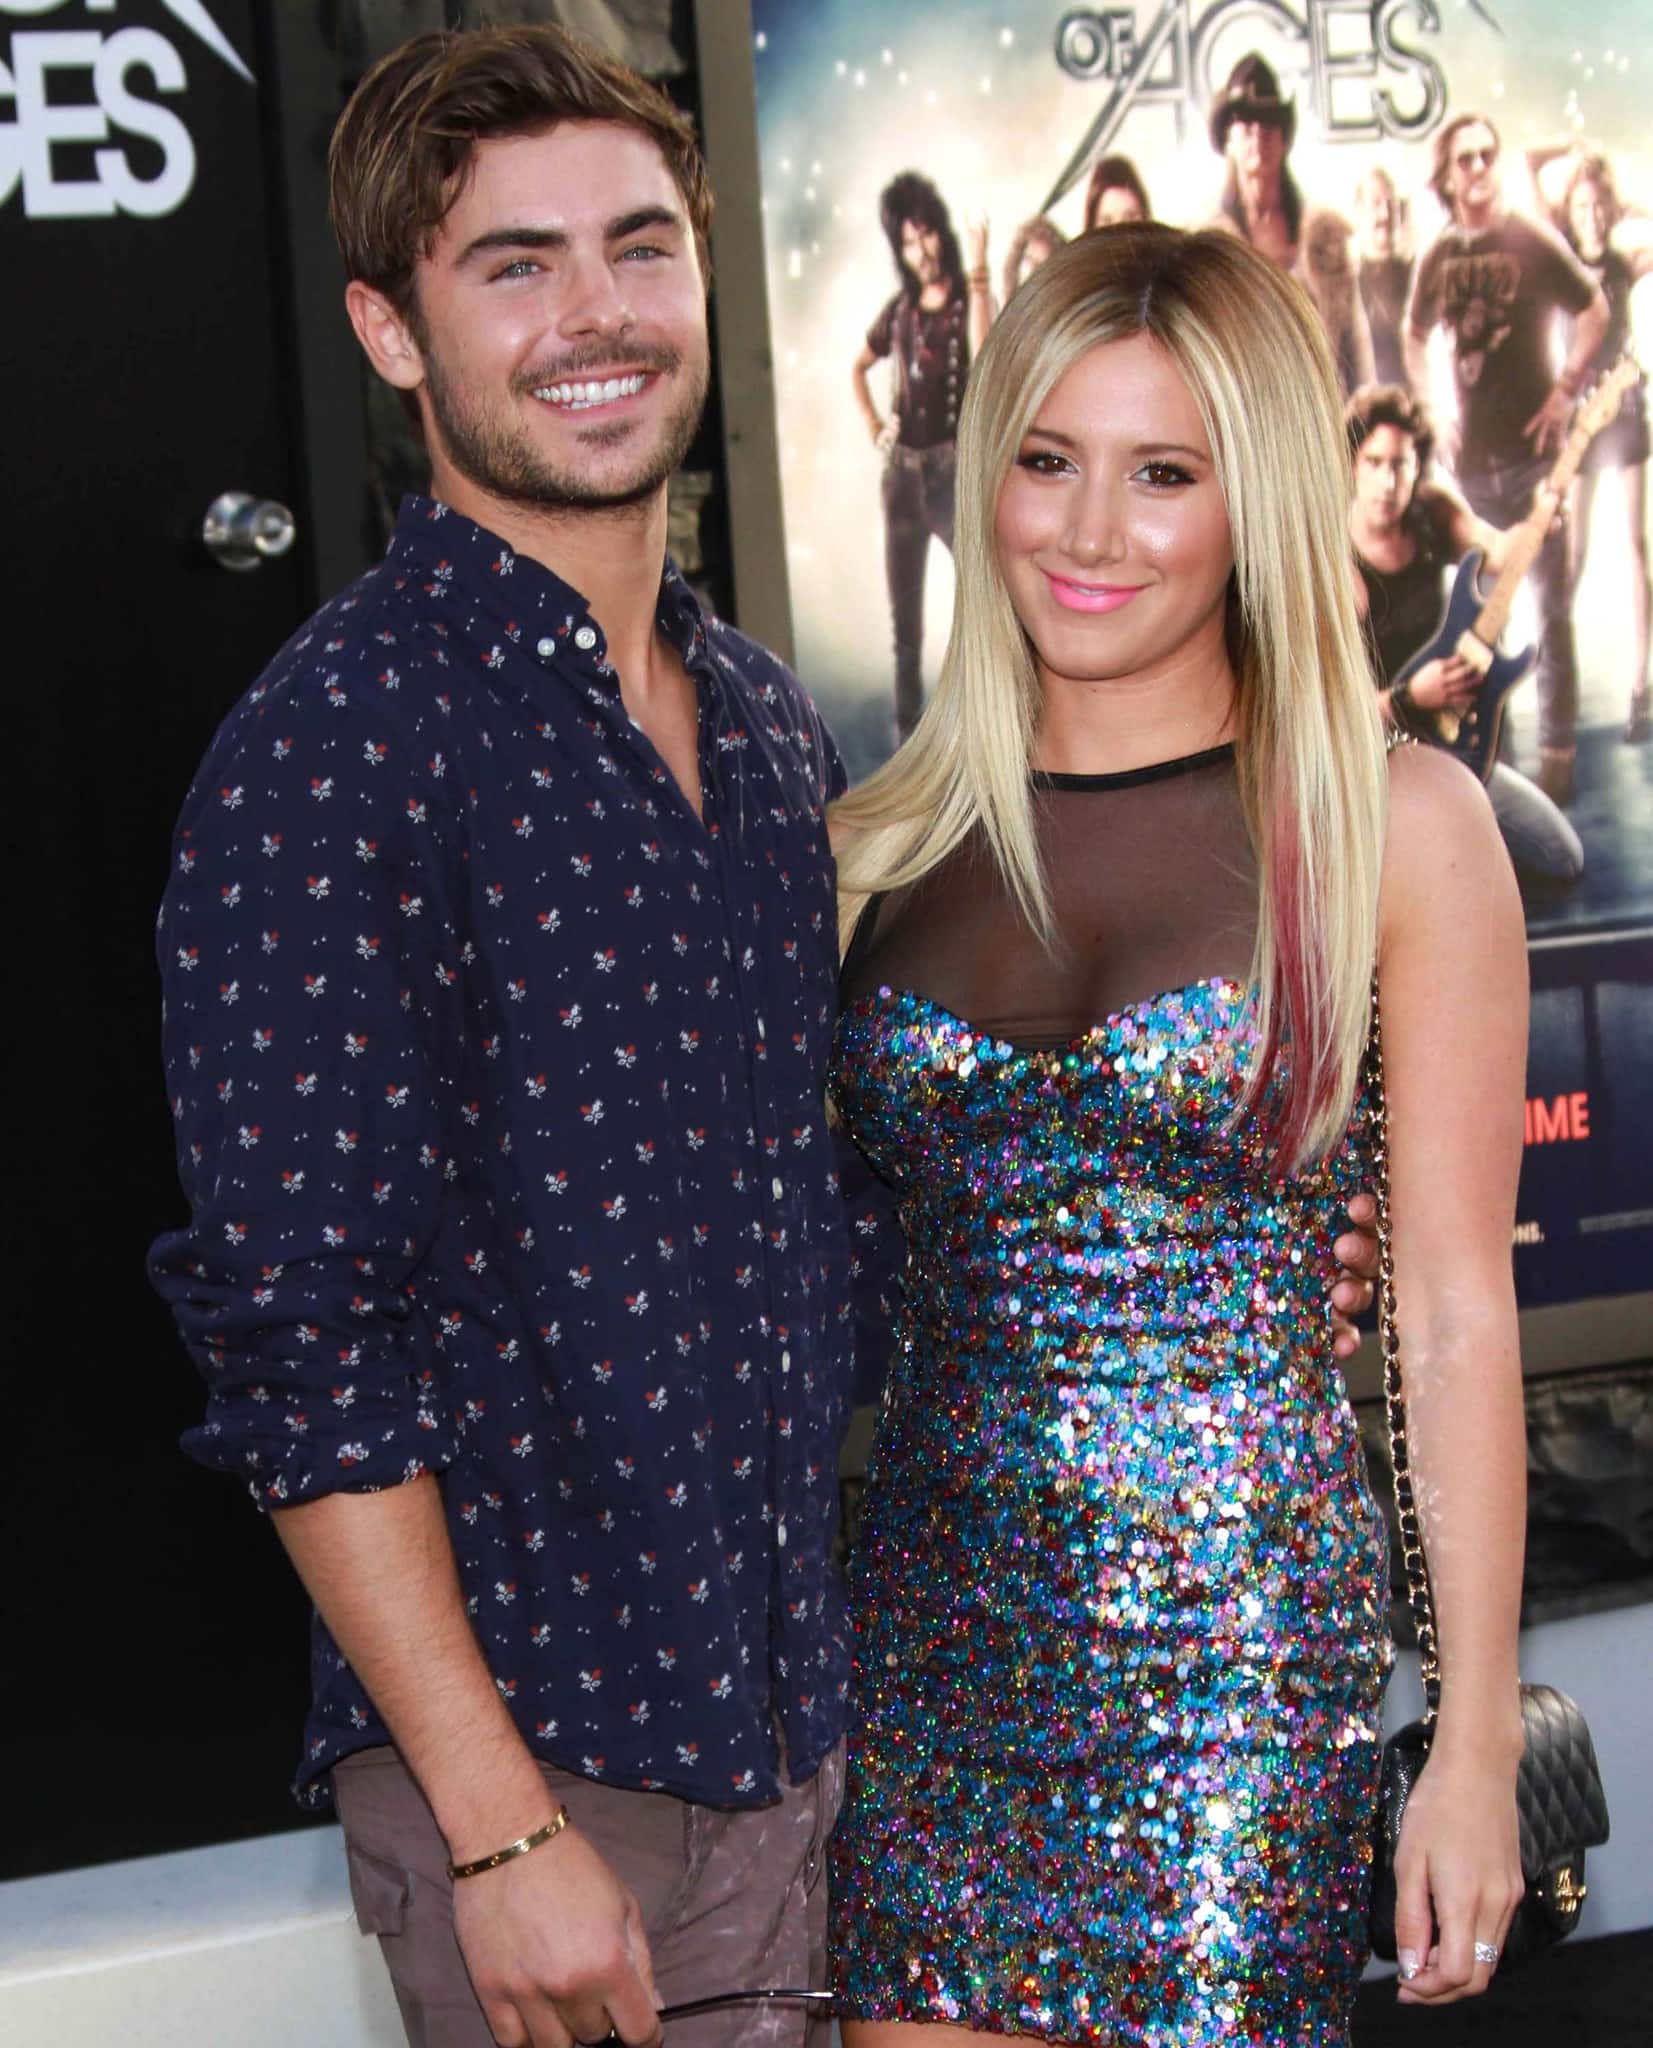 Ashley Tisdale said she quickly pulled away after she was met with a mouthful of Zac Efron's tongue during their kissing scene